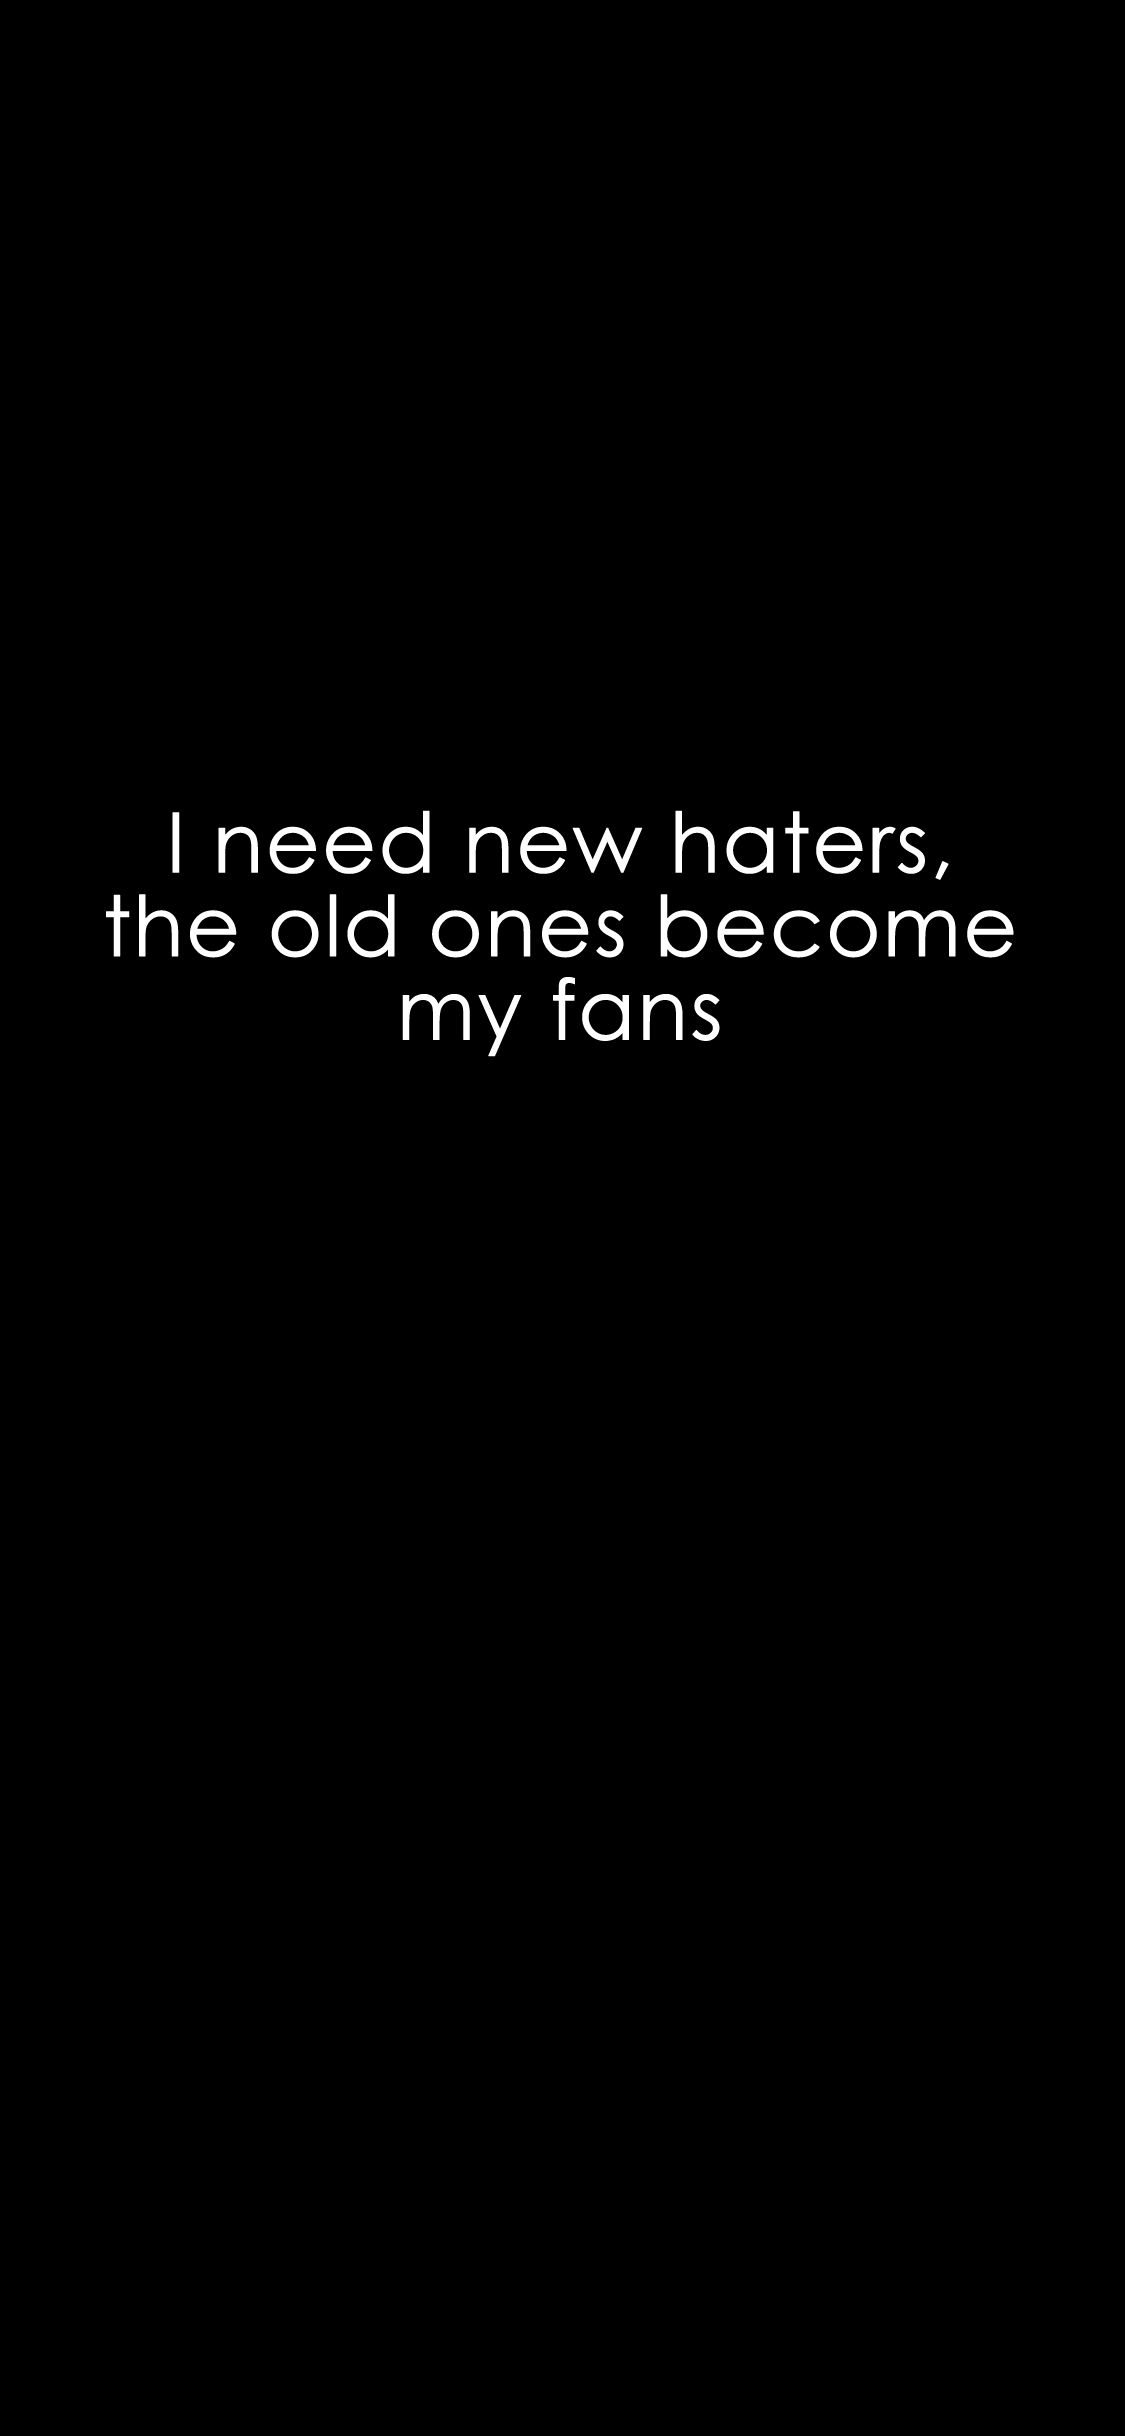 I Need New Haters Old Ones Bee My Fans iPhonex Wallpaper